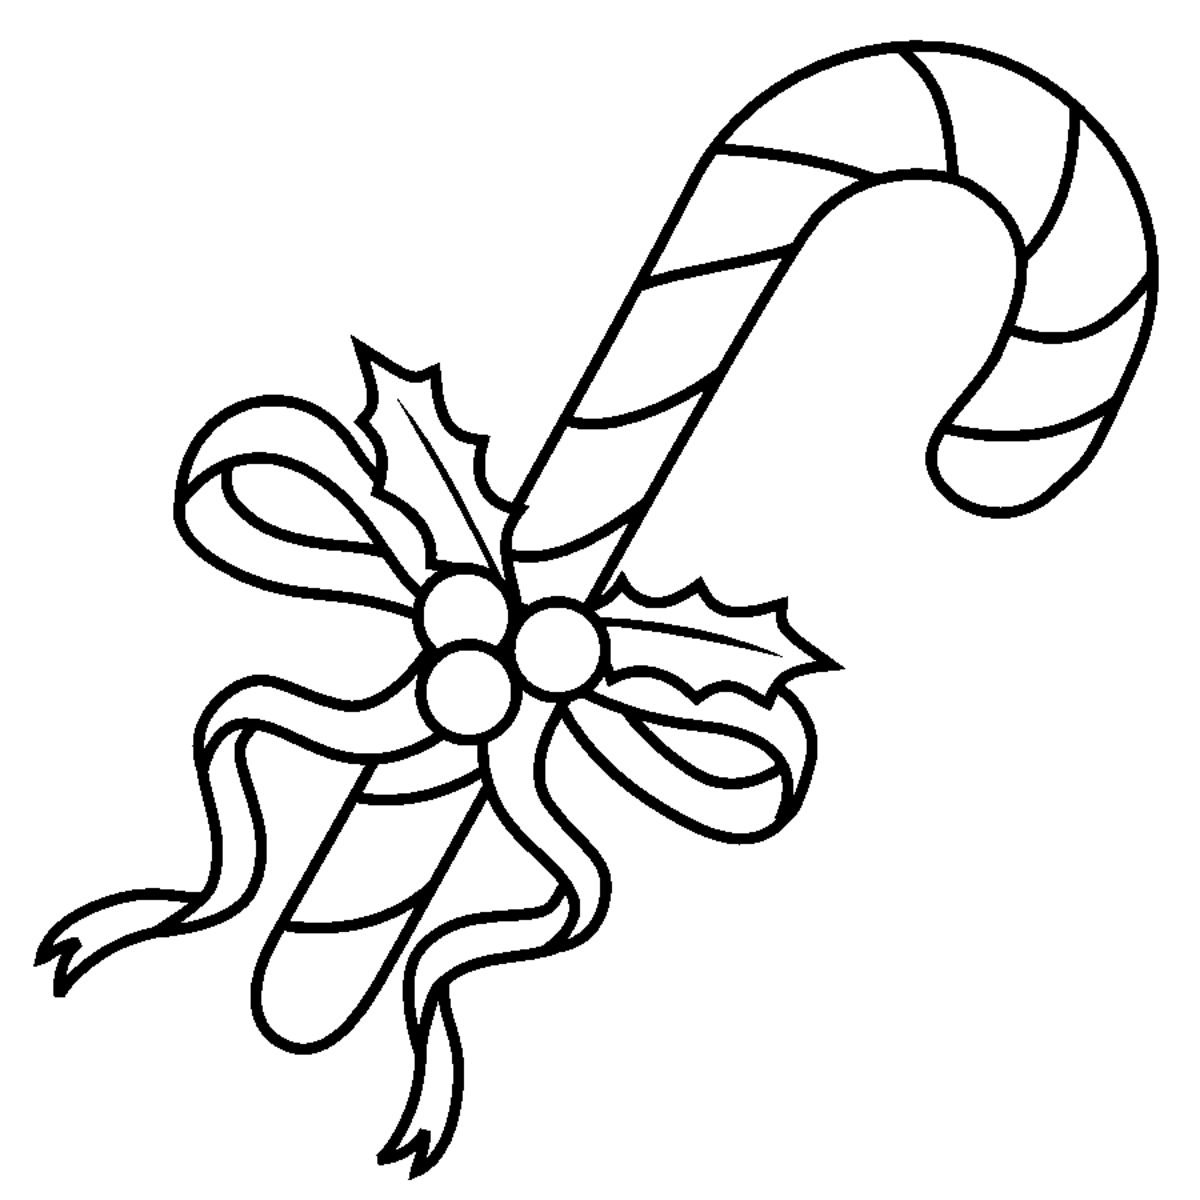 Candy Cane Coloring Page Free Printable Coloring Pages for Kids